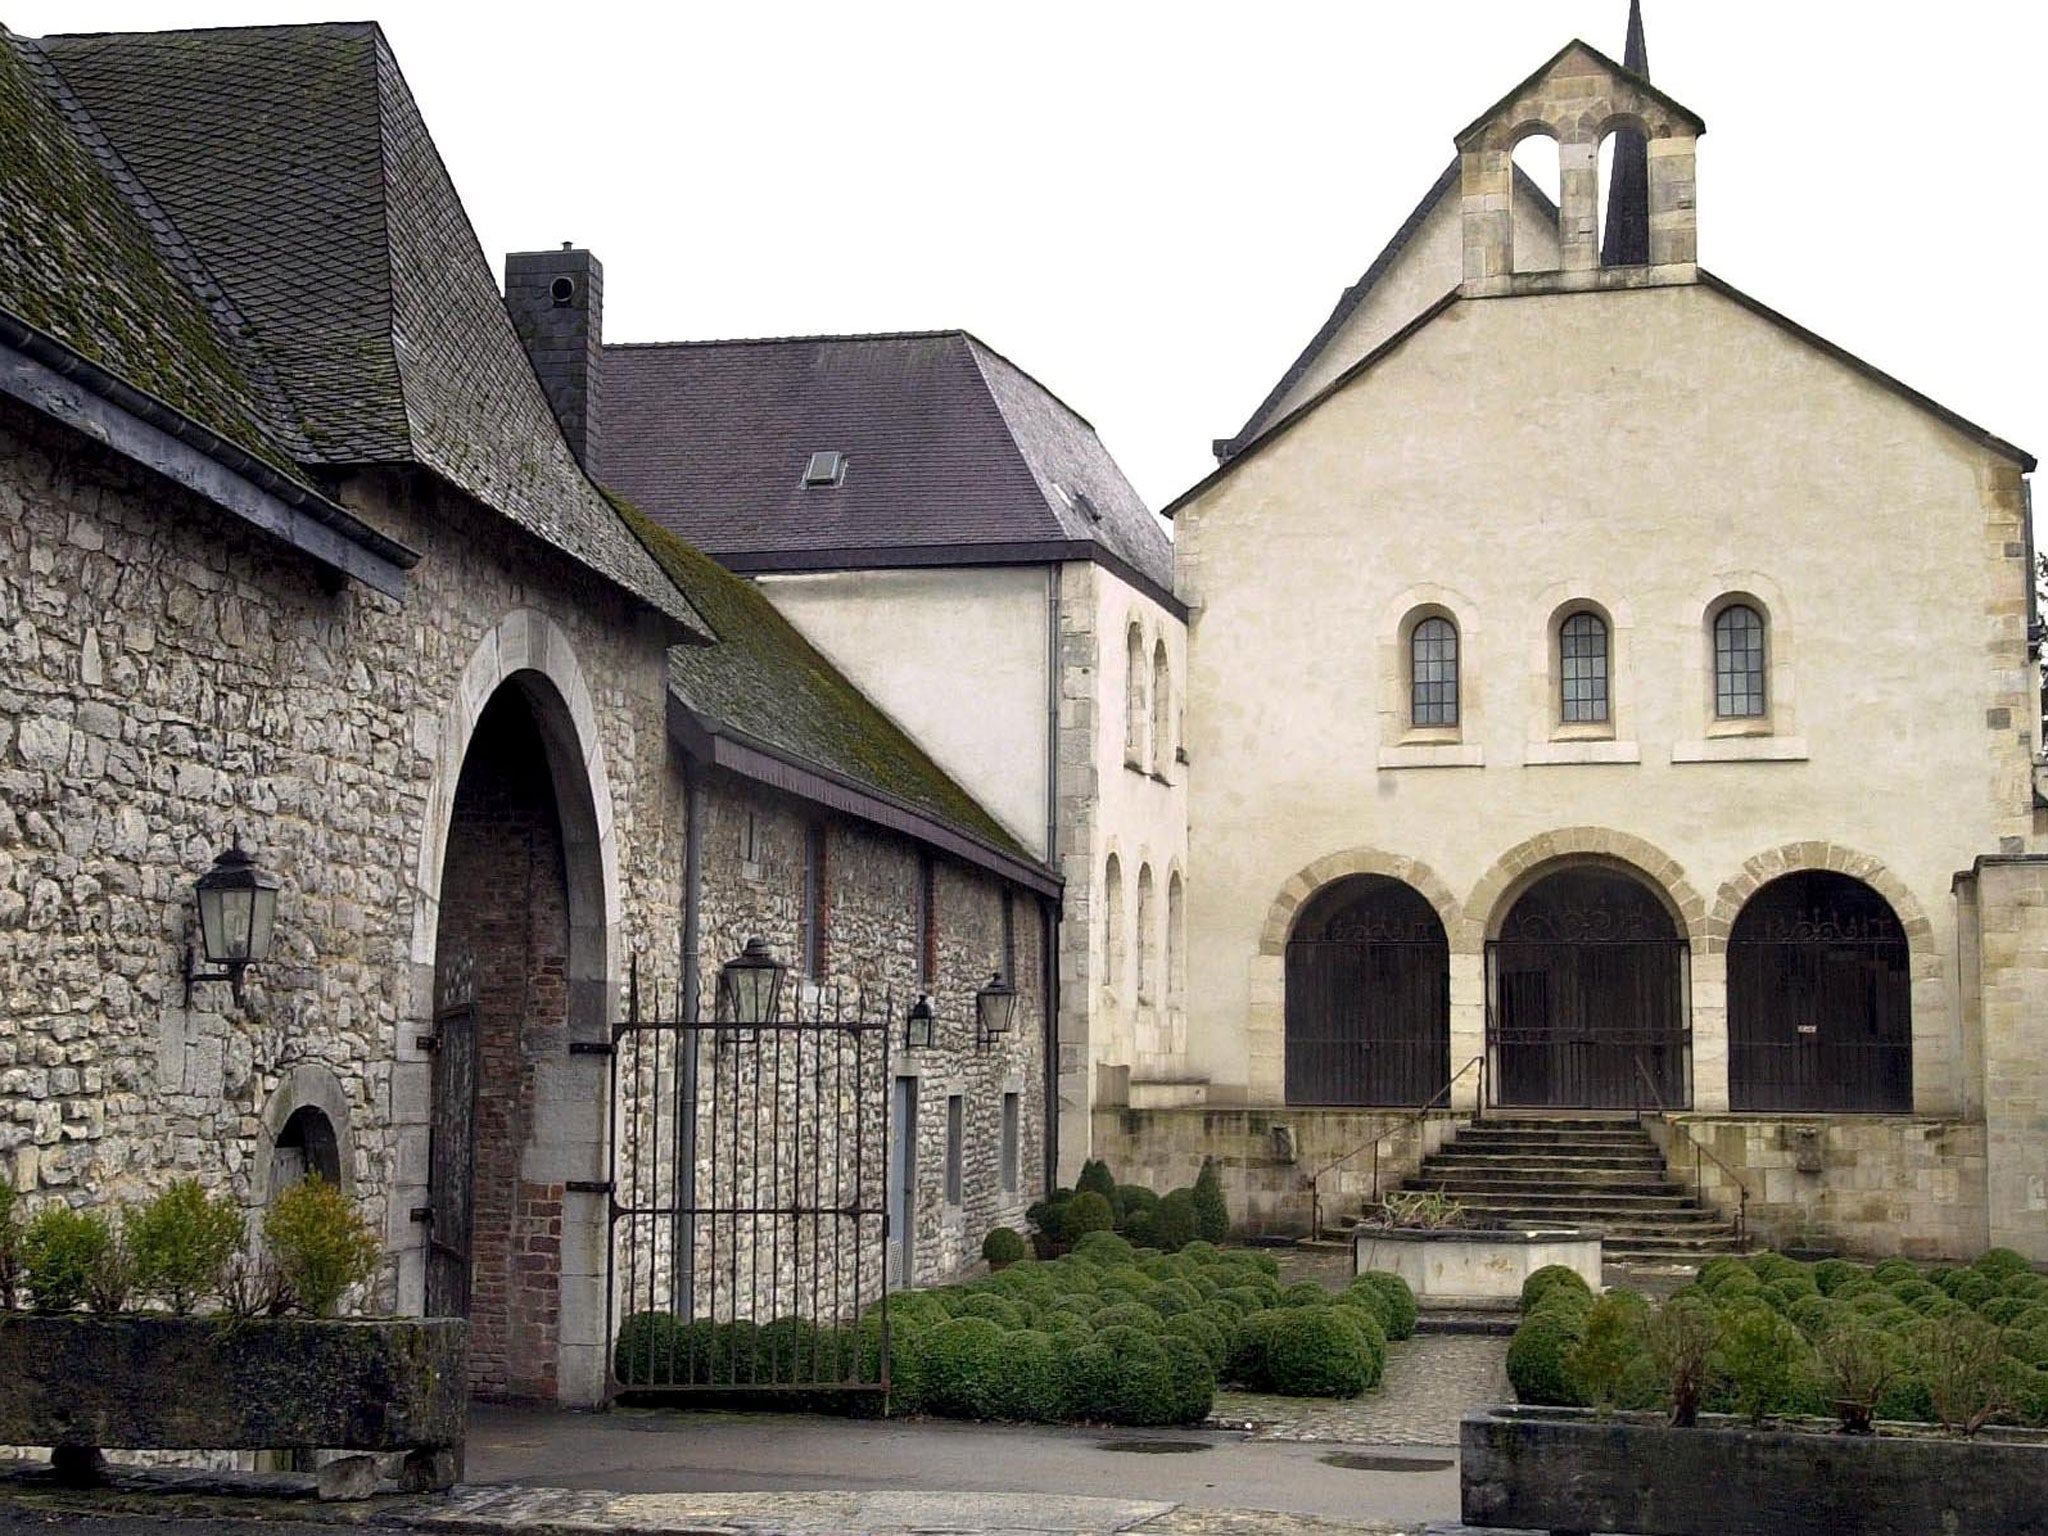 Production at the Notre-Dame de Saint-Remy-Rochefort abbey is under threat - from the expansion of a limestone quarry which will cut off their water supply